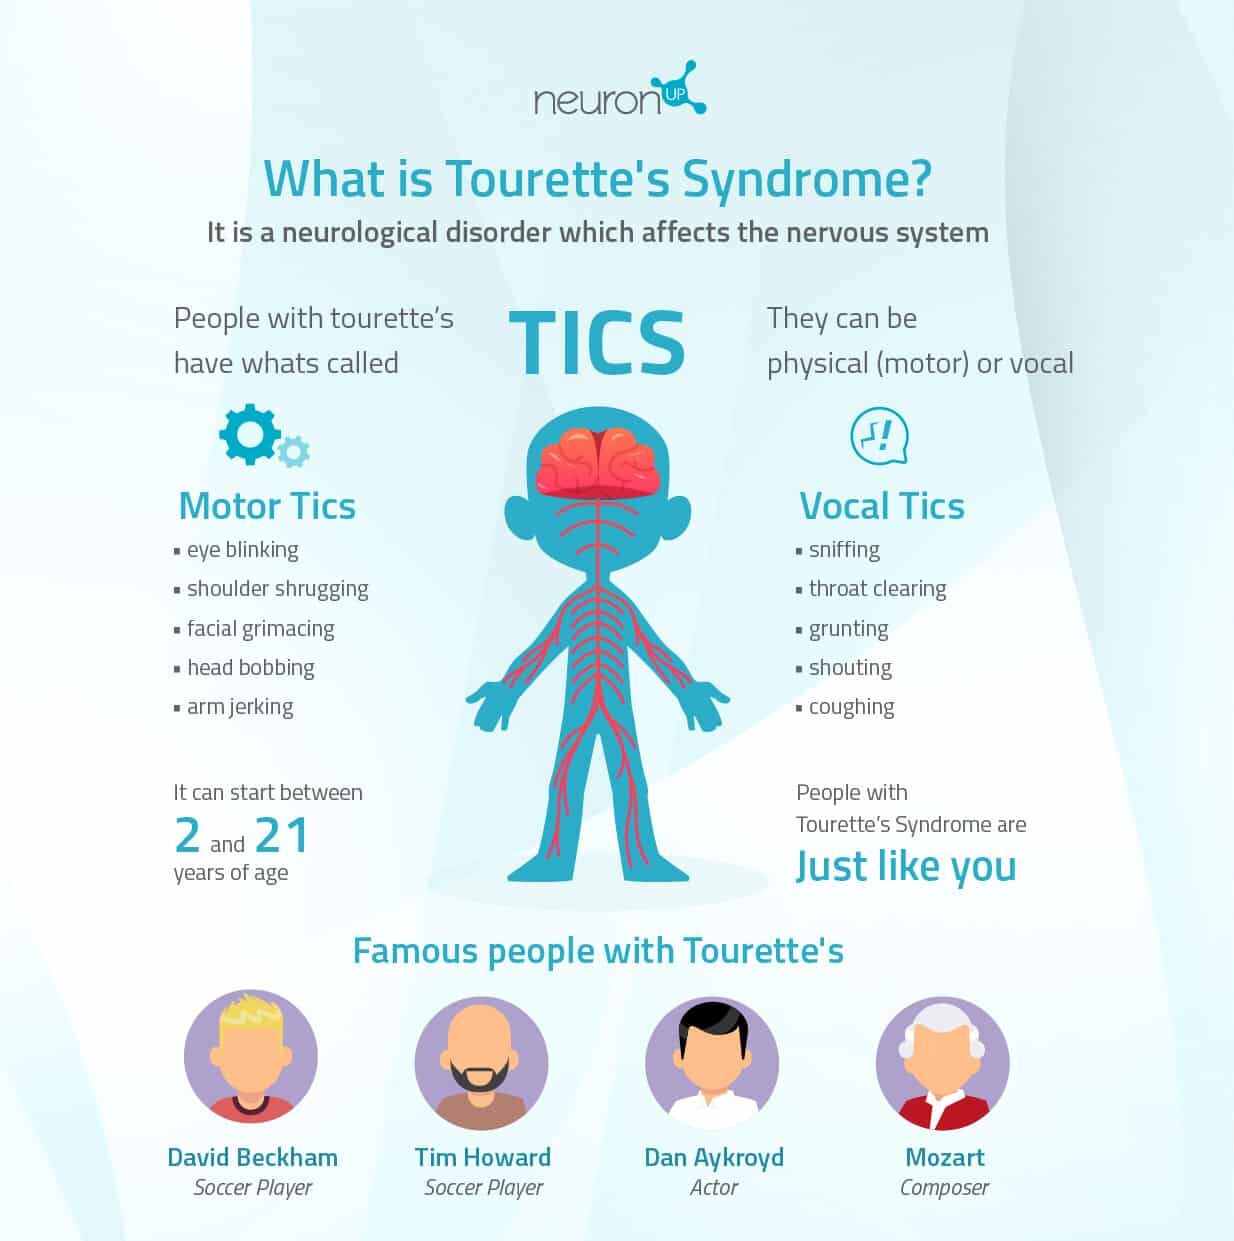 Infographic showing the symptoms of Tourette’s Syndrome